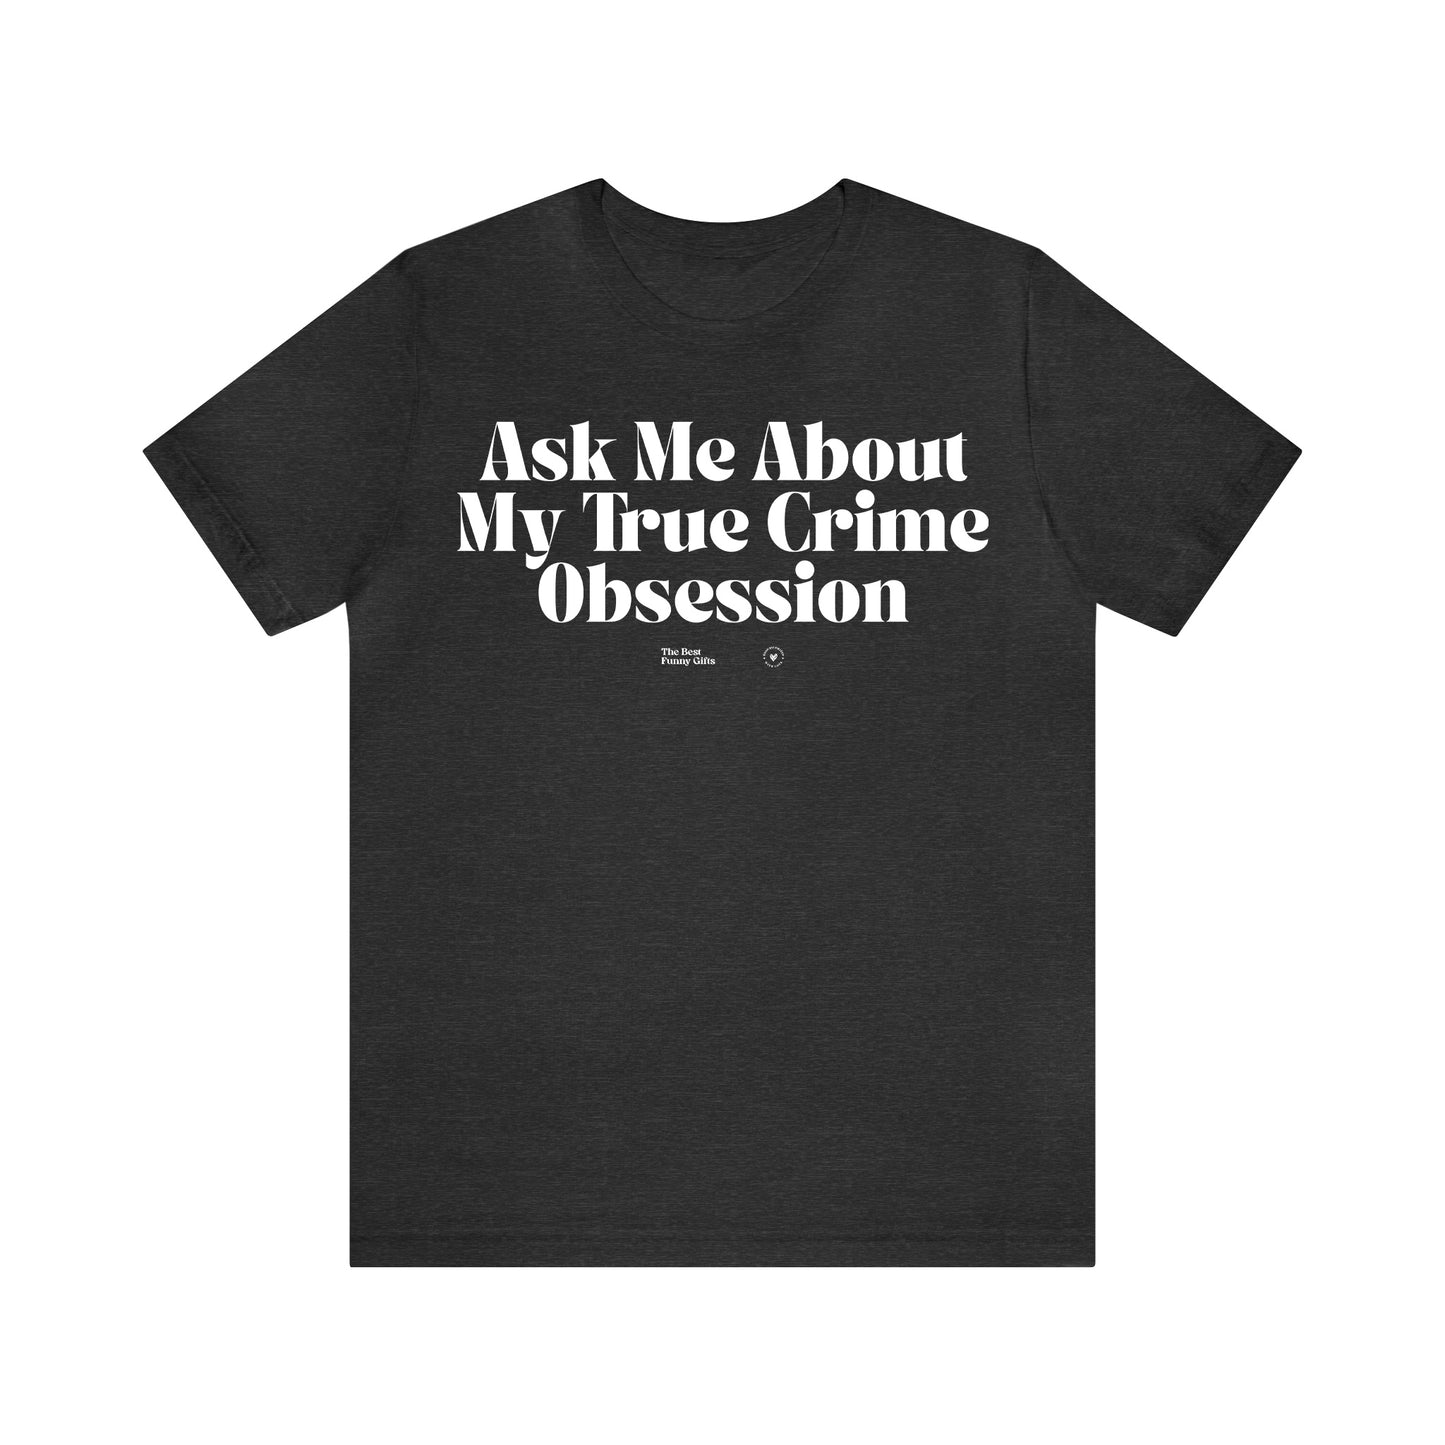 Funny Shirts for Women - Ask Me About My True Crime Obsession - Women’s T Shirts